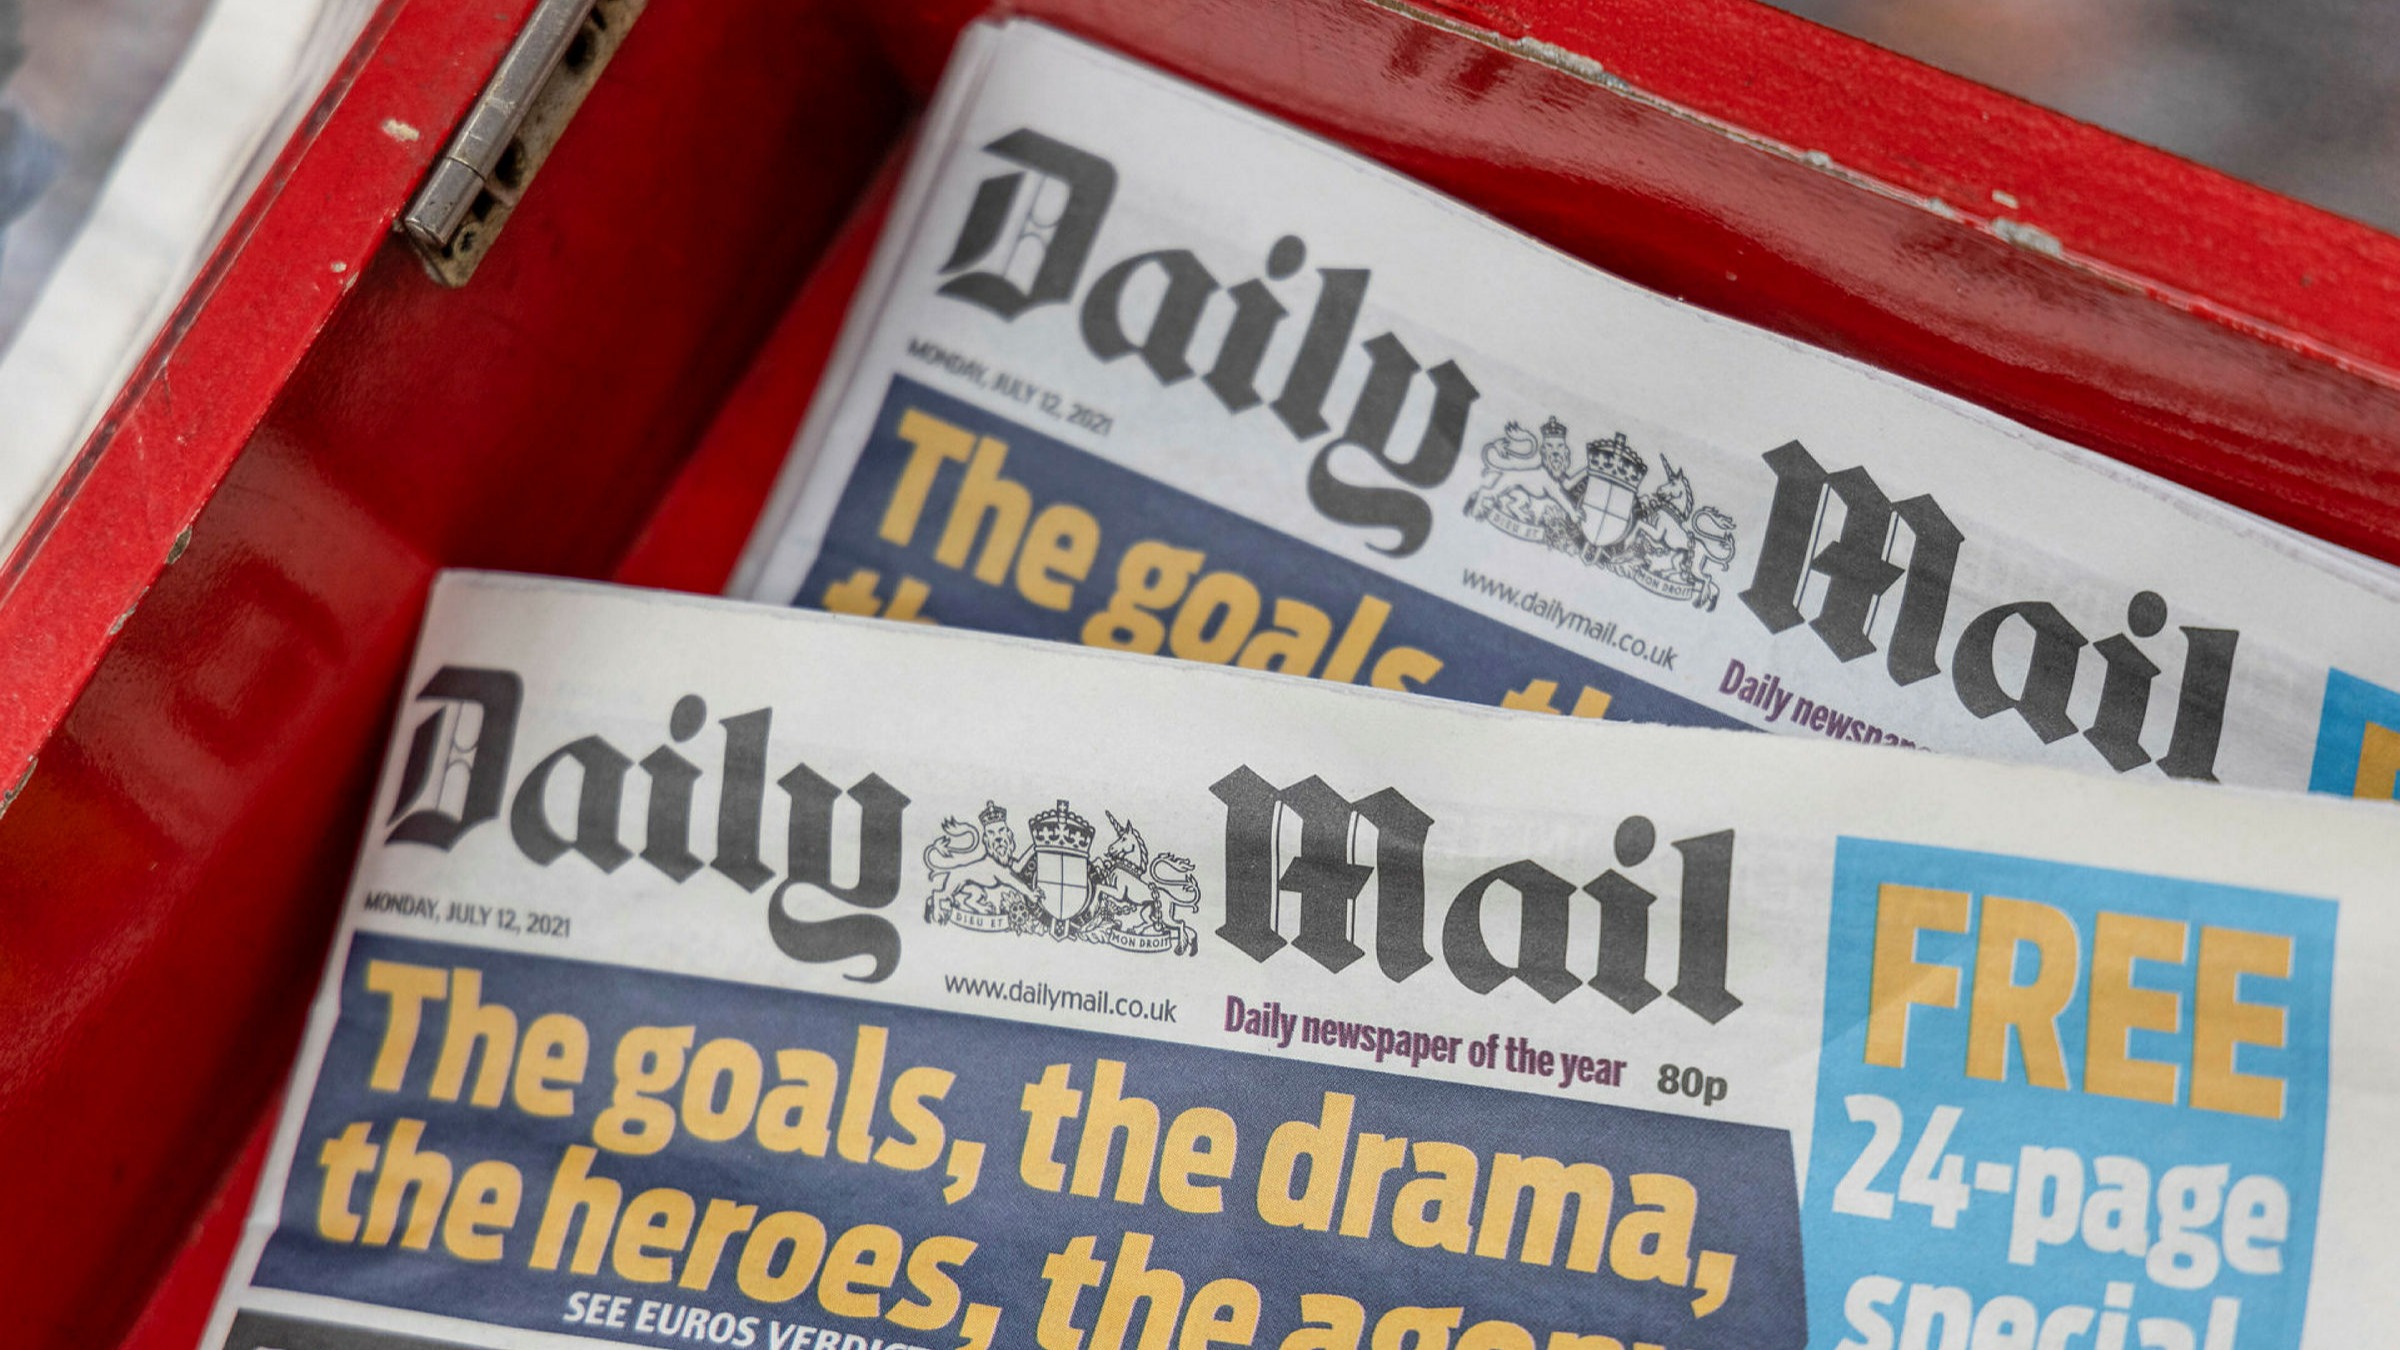 daily mail and general trust plc announce a final dividend 17.3p